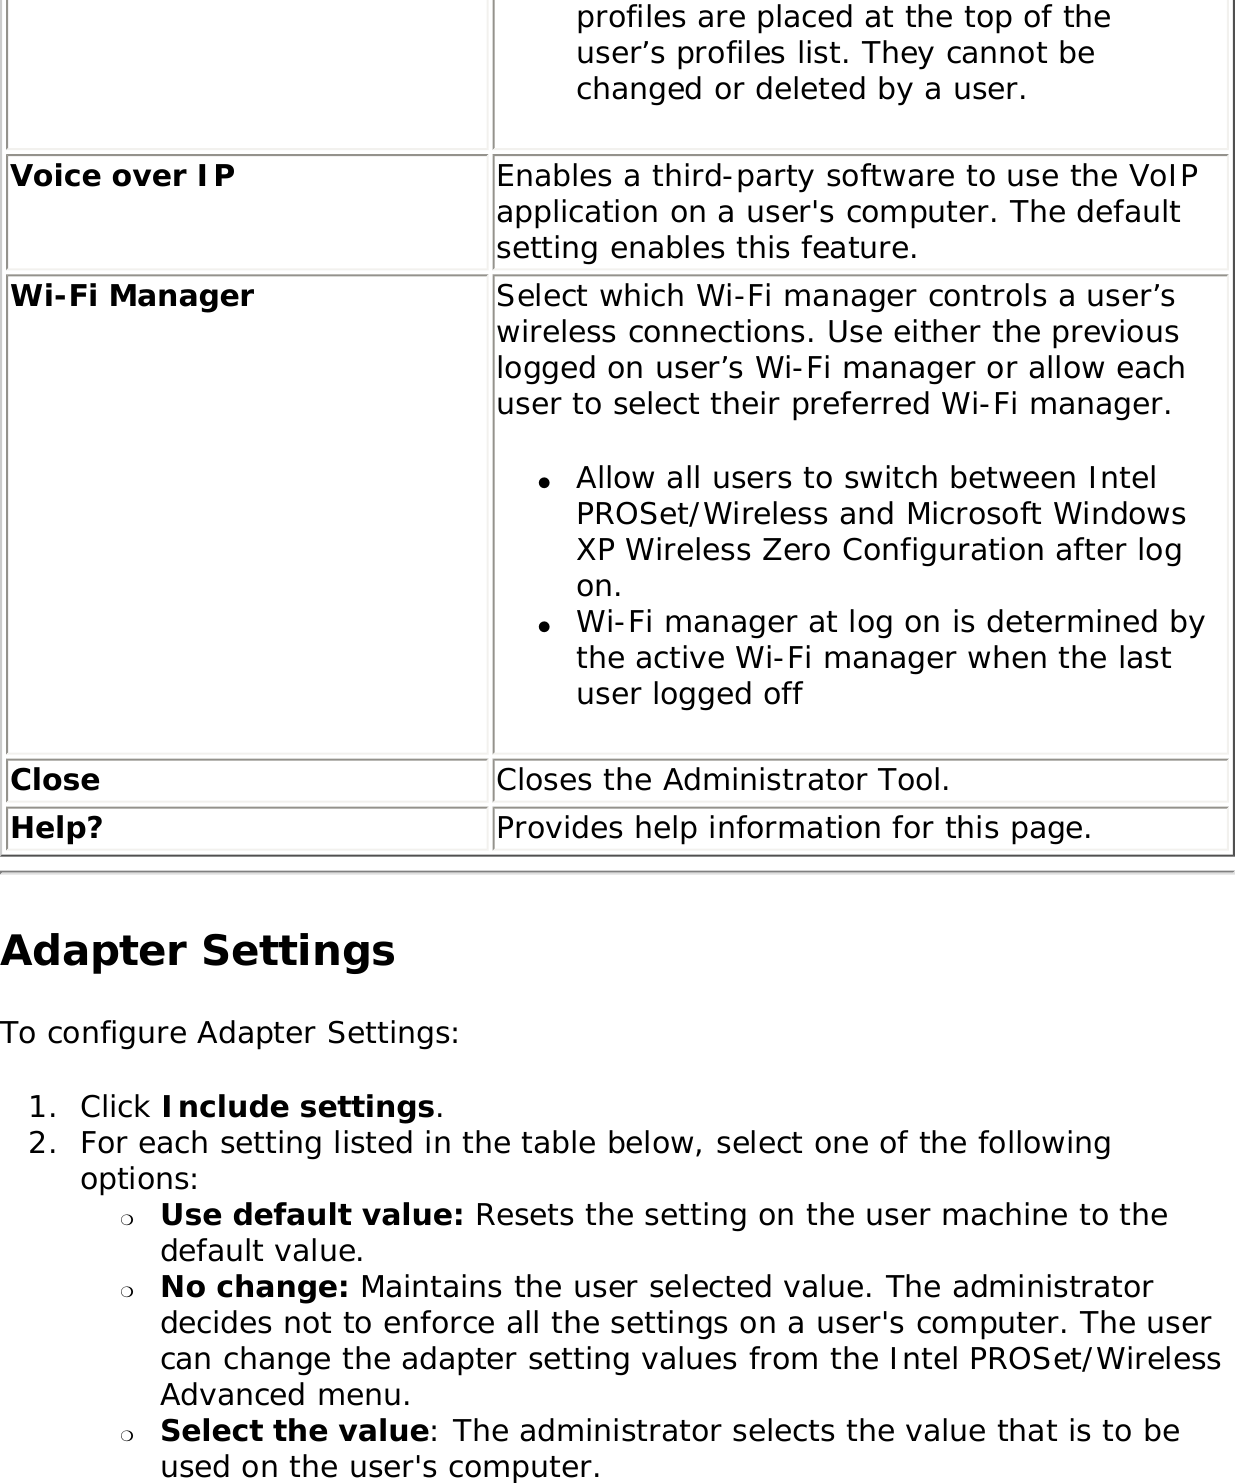 profiles are placed at the top of the user’s profiles list. They cannot be changed or deleted by a user. Voice over IP Enables a third-party software to use the VoIP application on a user&apos;s computer. The default setting enables this feature. Wi-Fi Manager  Select which Wi-Fi manager controls a user’s wireless connections. Use either the previous logged on user’s Wi-Fi manager or allow each user to select their preferred Wi-Fi manager.●     Allow all users to switch between Intel PROSet/Wireless and Microsoft Windows XP Wireless Zero Configuration after log on.●     Wi-Fi manager at log on is determined by the active Wi-Fi manager when the last user logged off Close  Closes the Administrator Tool. Help? Provides help information for this page.Adapter Settings To configure Adapter Settings: 1.  Click Include settings.2.  For each setting listed in the table below, select one of the following options: ❍     Use default value: Resets the setting on the user machine to the default value. ❍     No change: Maintains the user selected value. The administrator decides not to enforce all the settings on a user&apos;s computer. The user can change the adapter setting values from the Intel PROSet/Wireless Advanced menu. ❍     Select the value: The administrator selects the value that is to be used on the user&apos;s computer. 